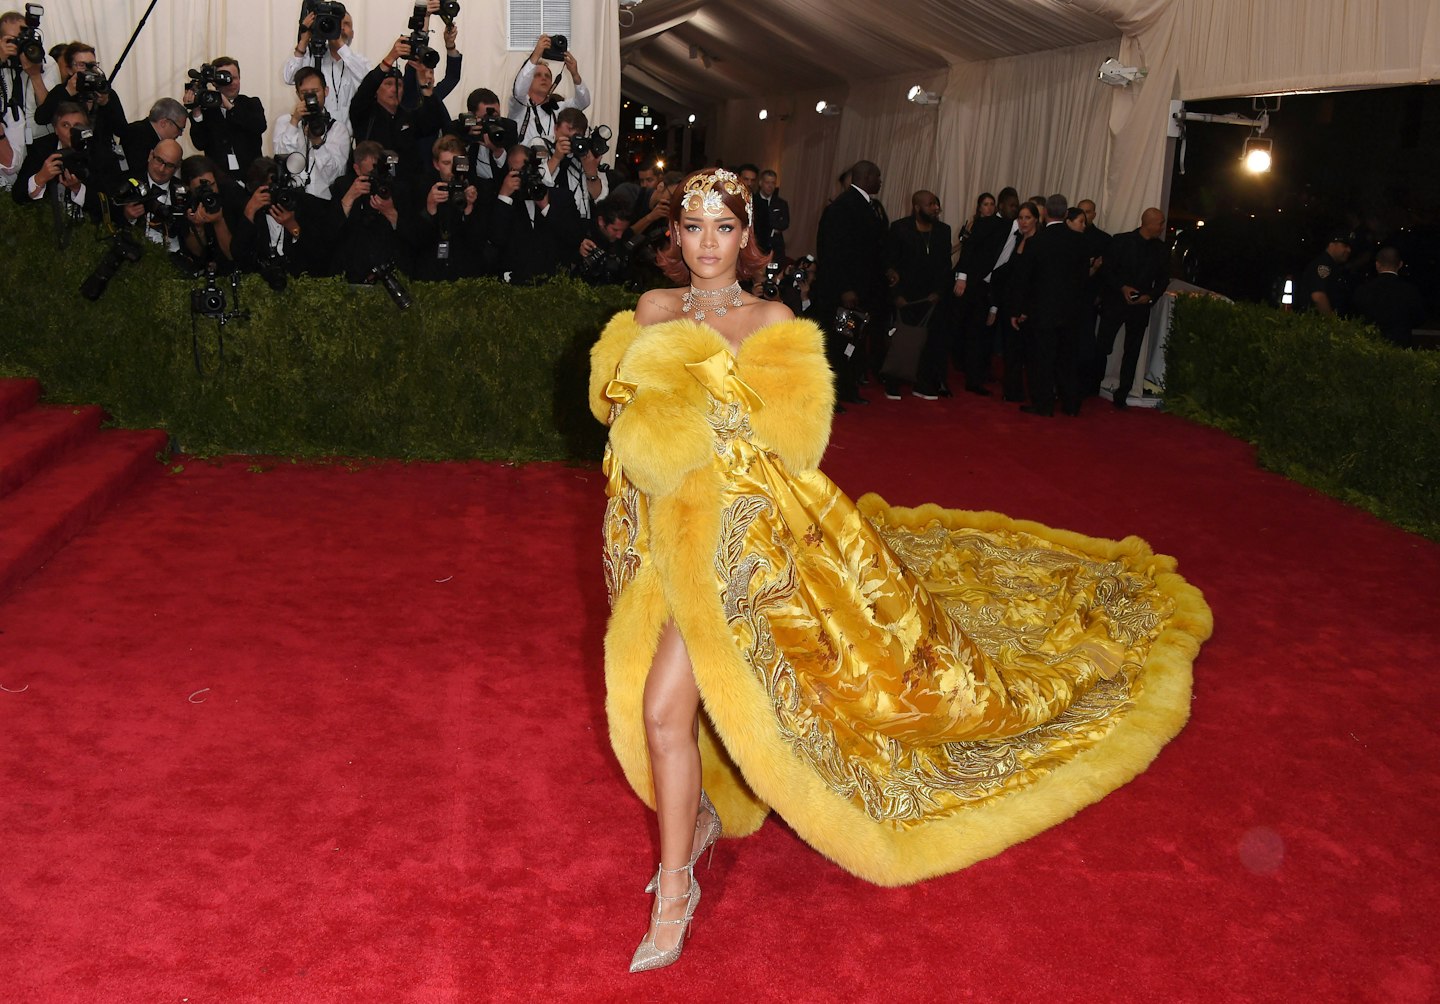 Is The Met Gala Theme For 2019 Actually Just Offensive?